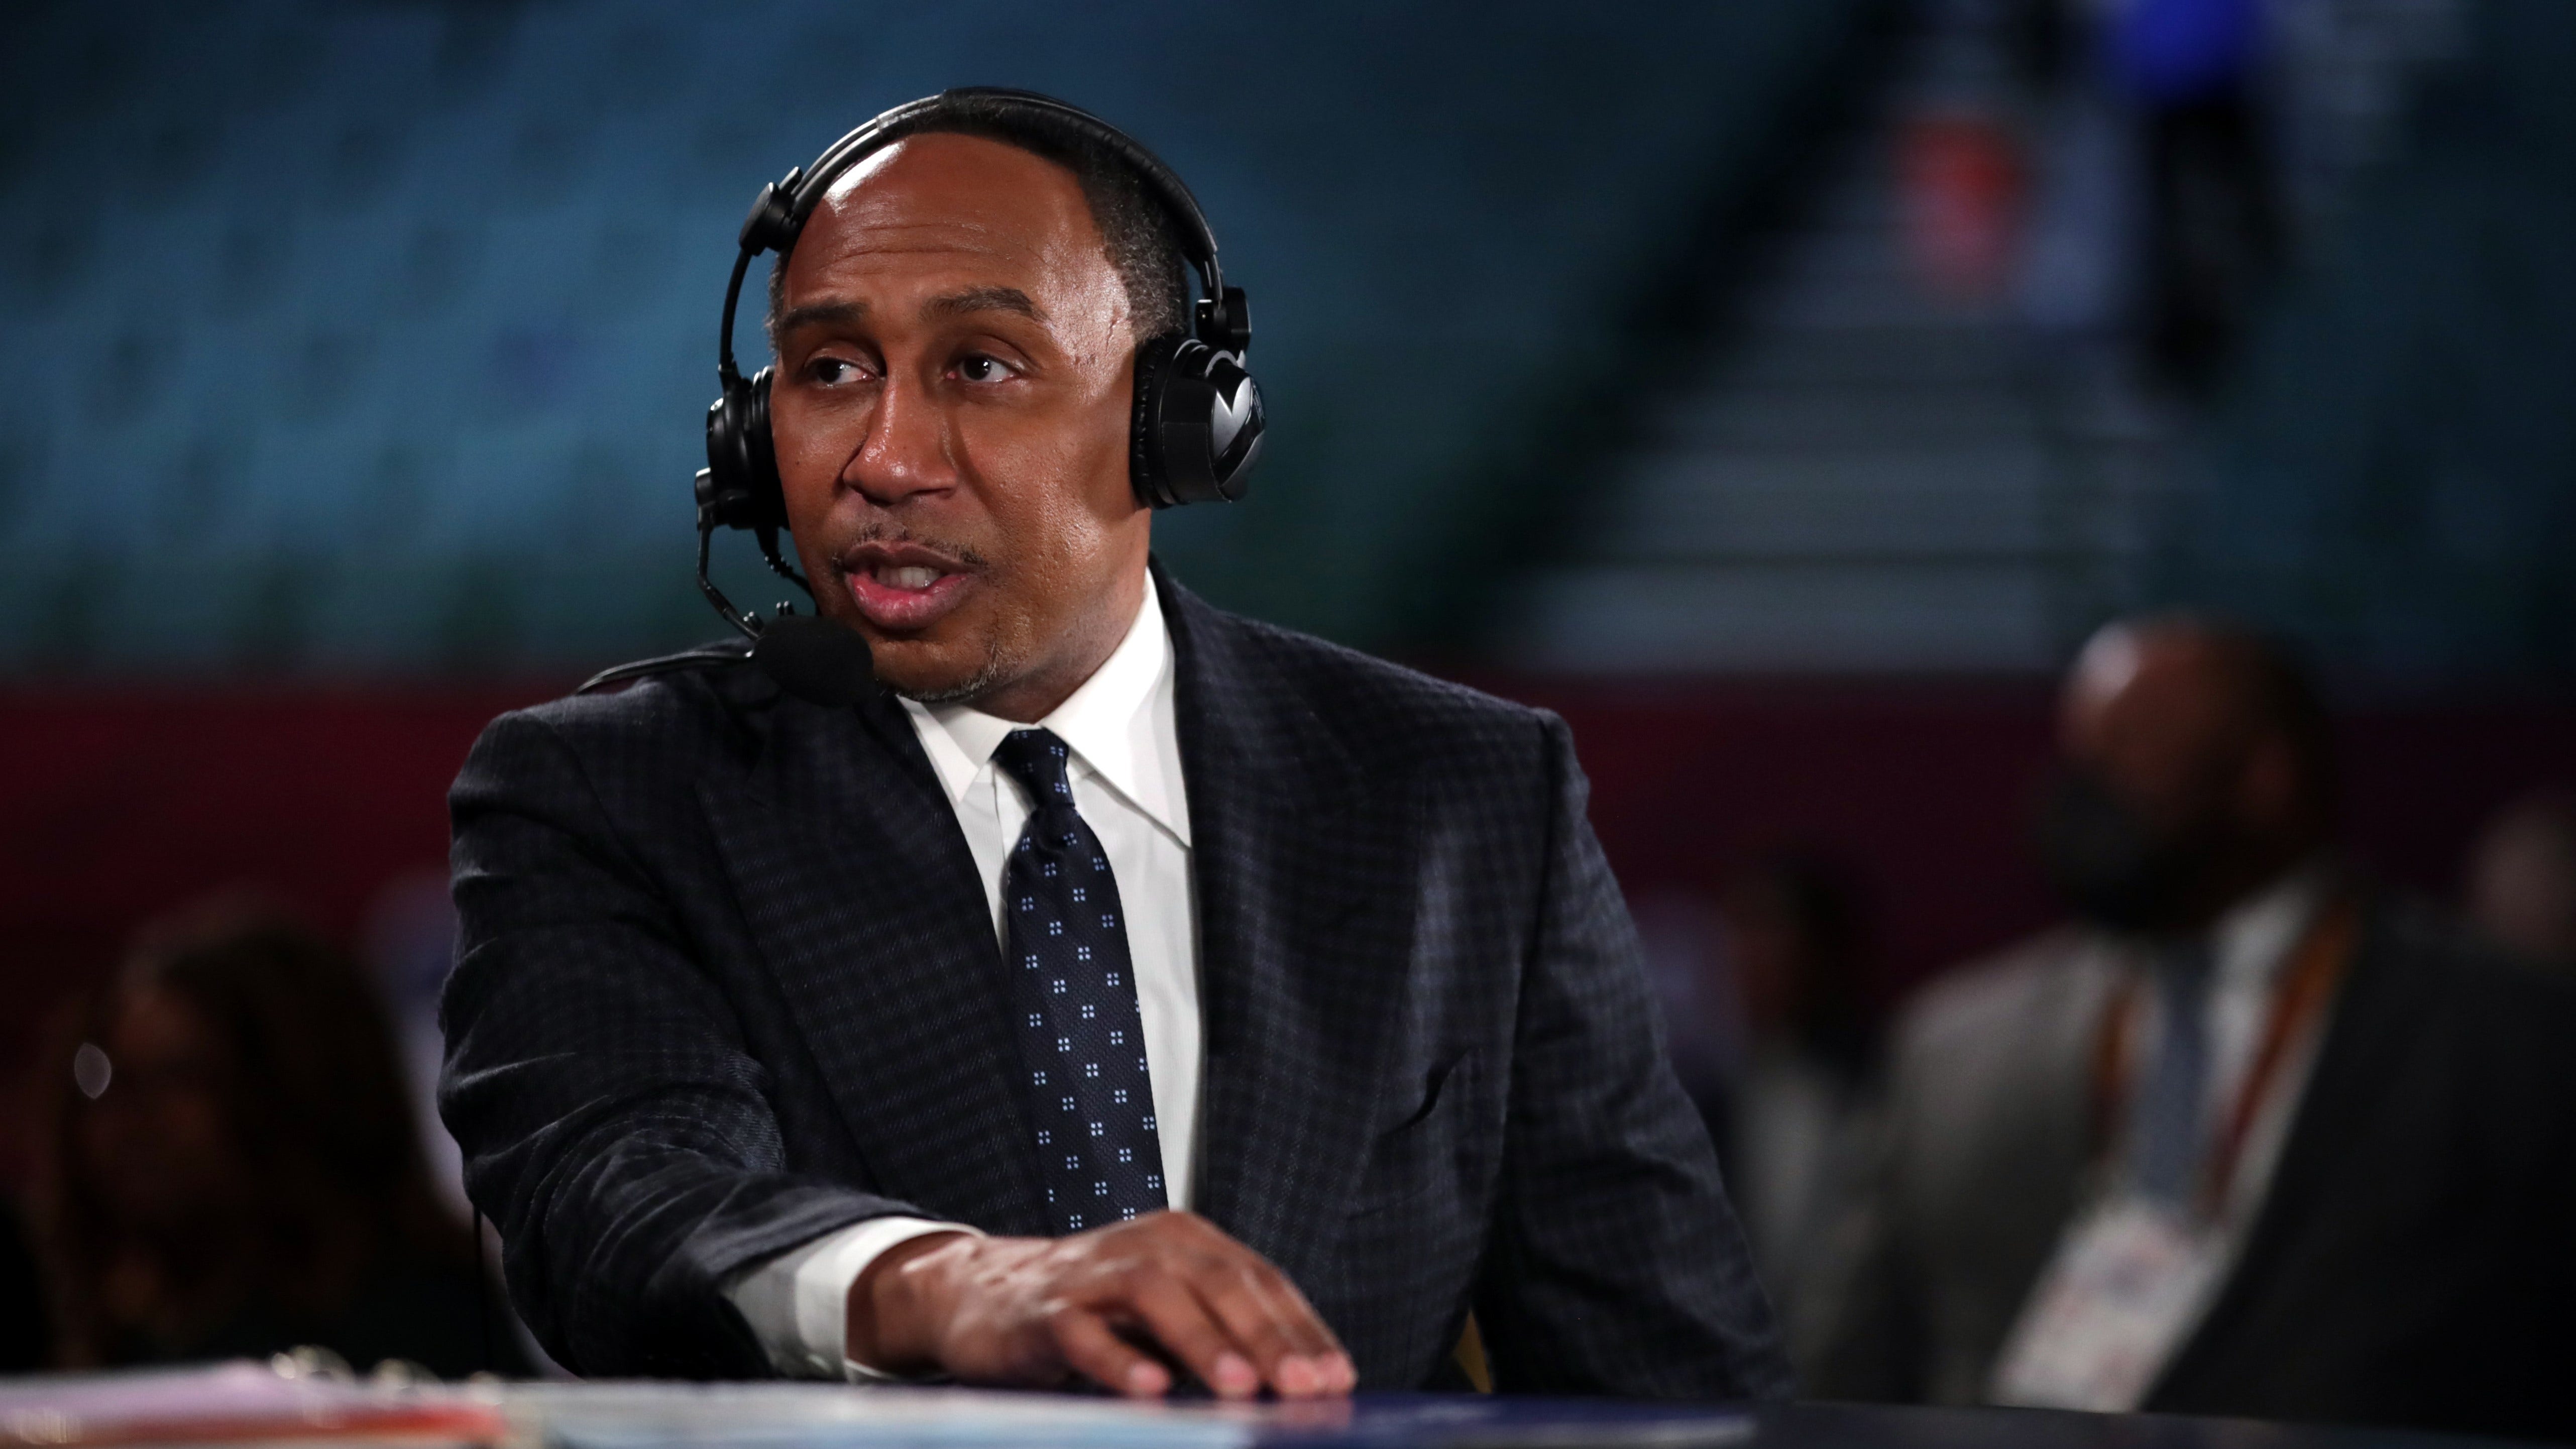 ESPN host rips sports-politics 'hypocrisy,' but says athletes should understand issues